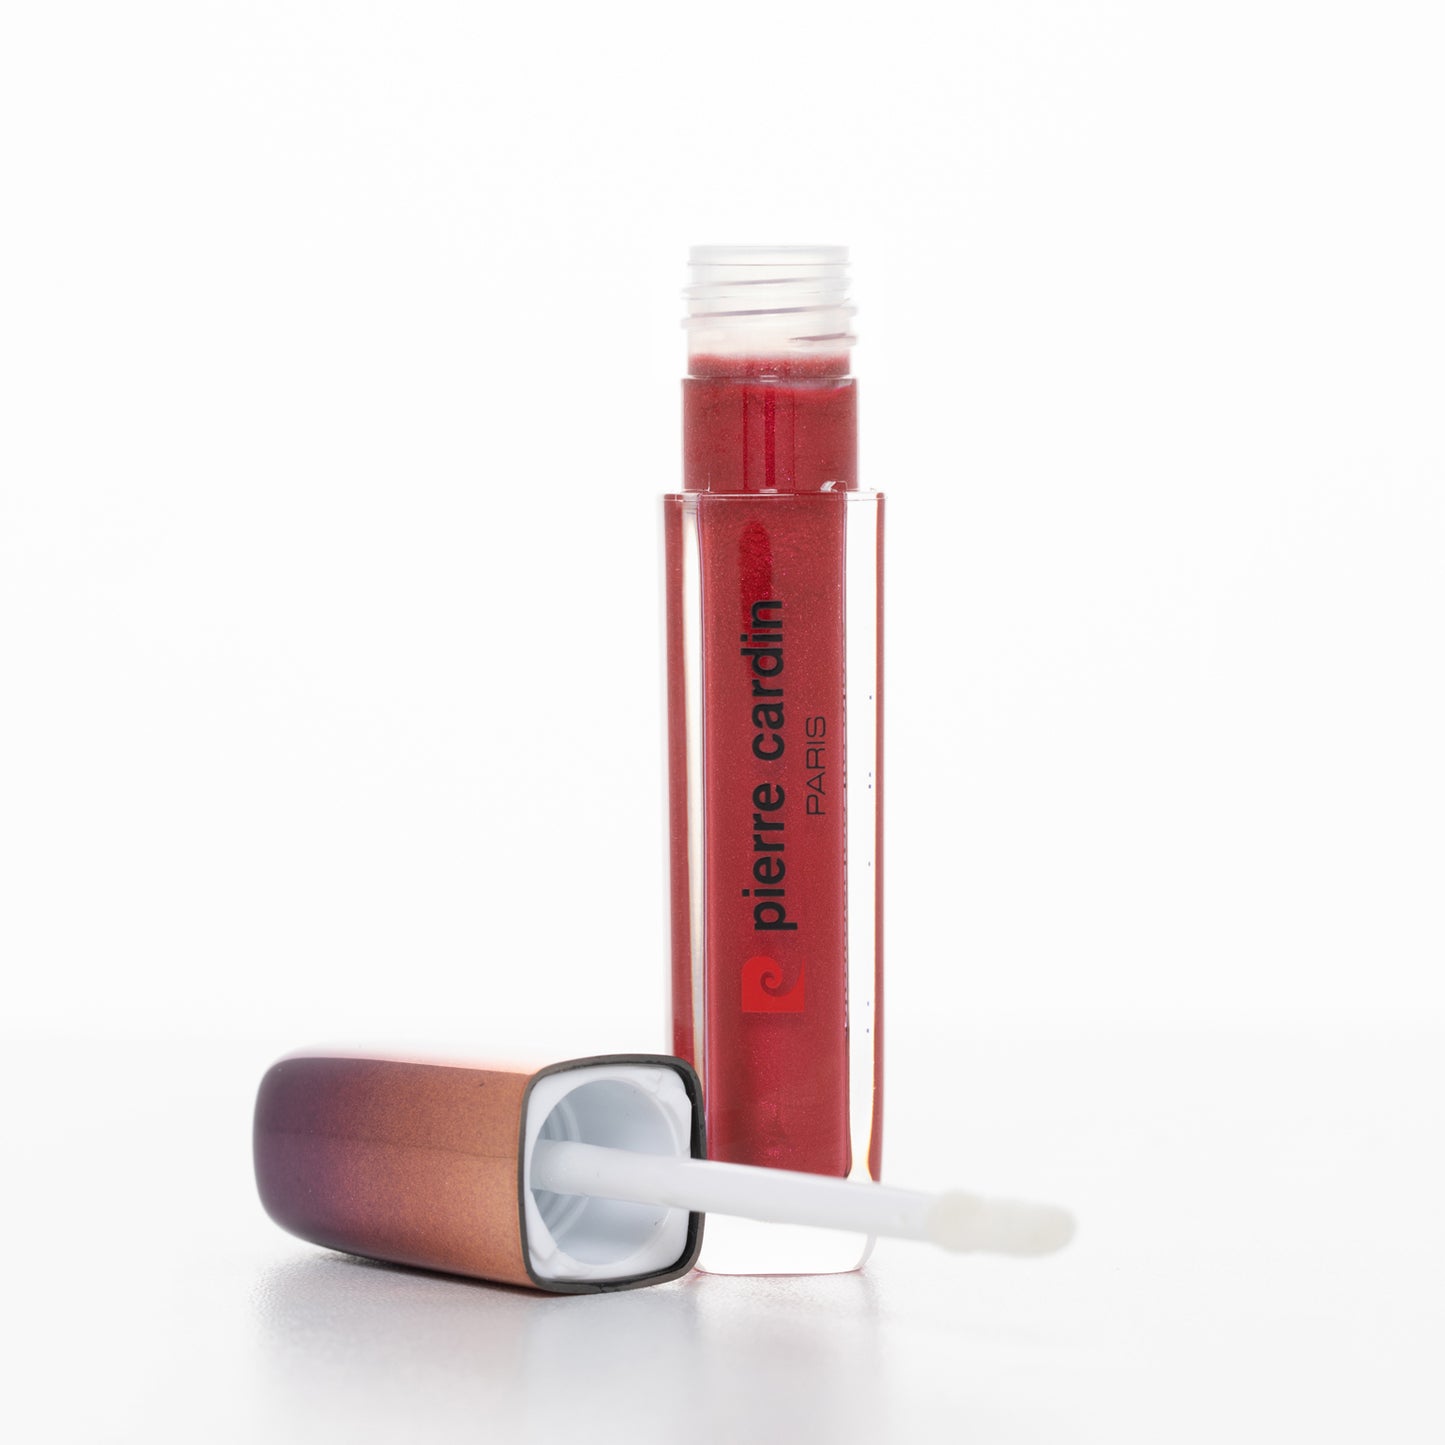 Pierre Cardin Shimmering Lipgloss Rosy Red 510 - 5 ml